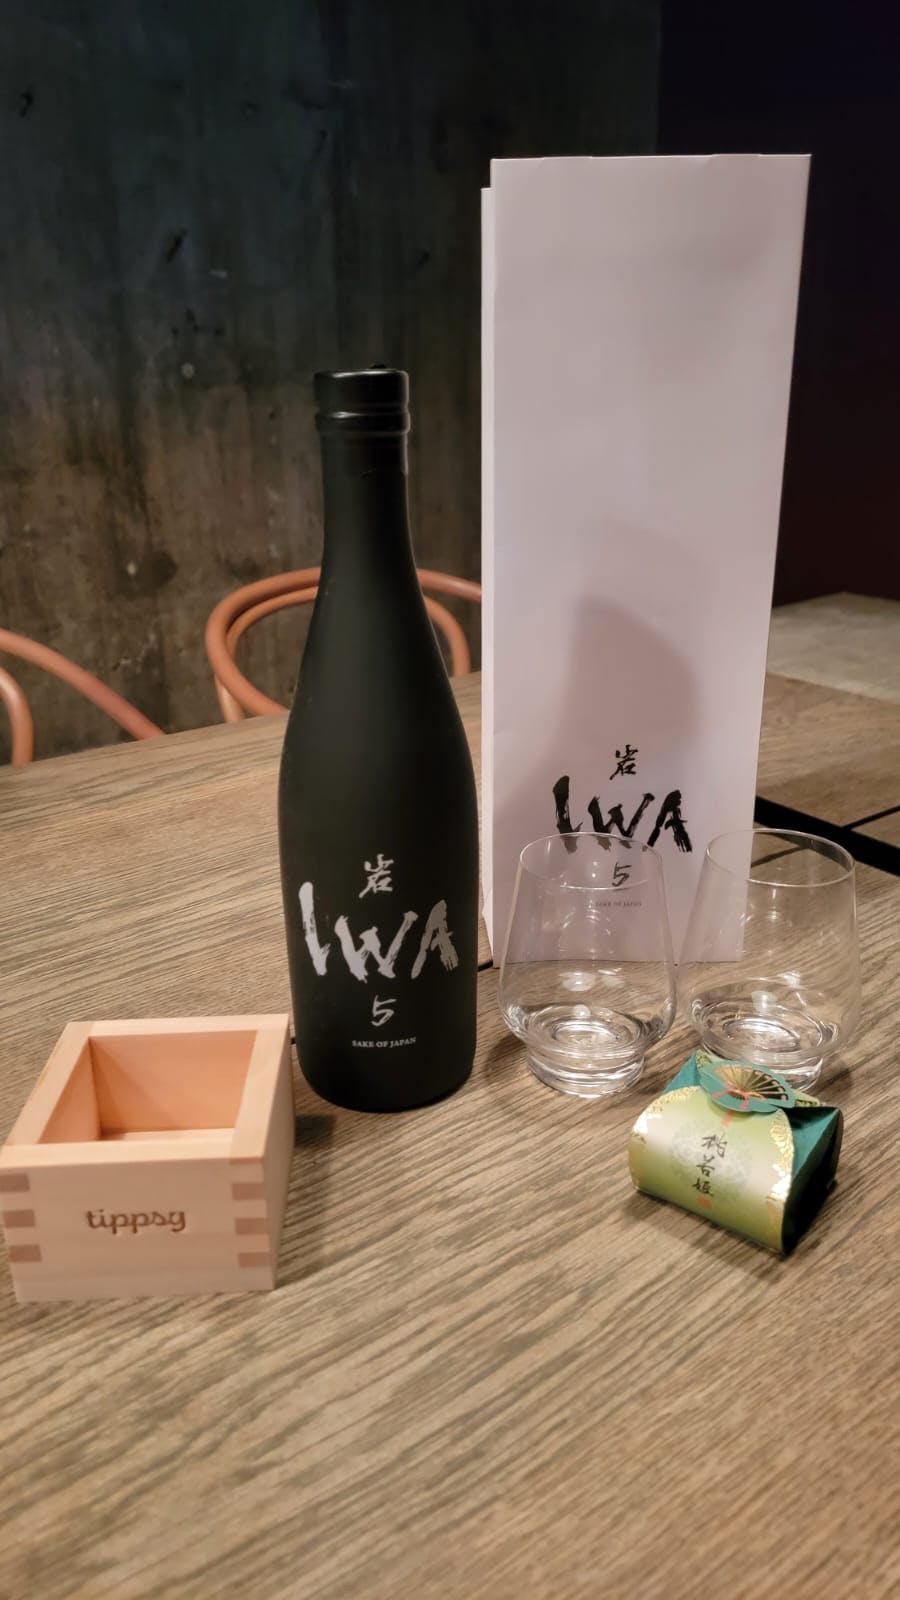 Guests who selected the VIP bundle received a bottle of IWA 5.